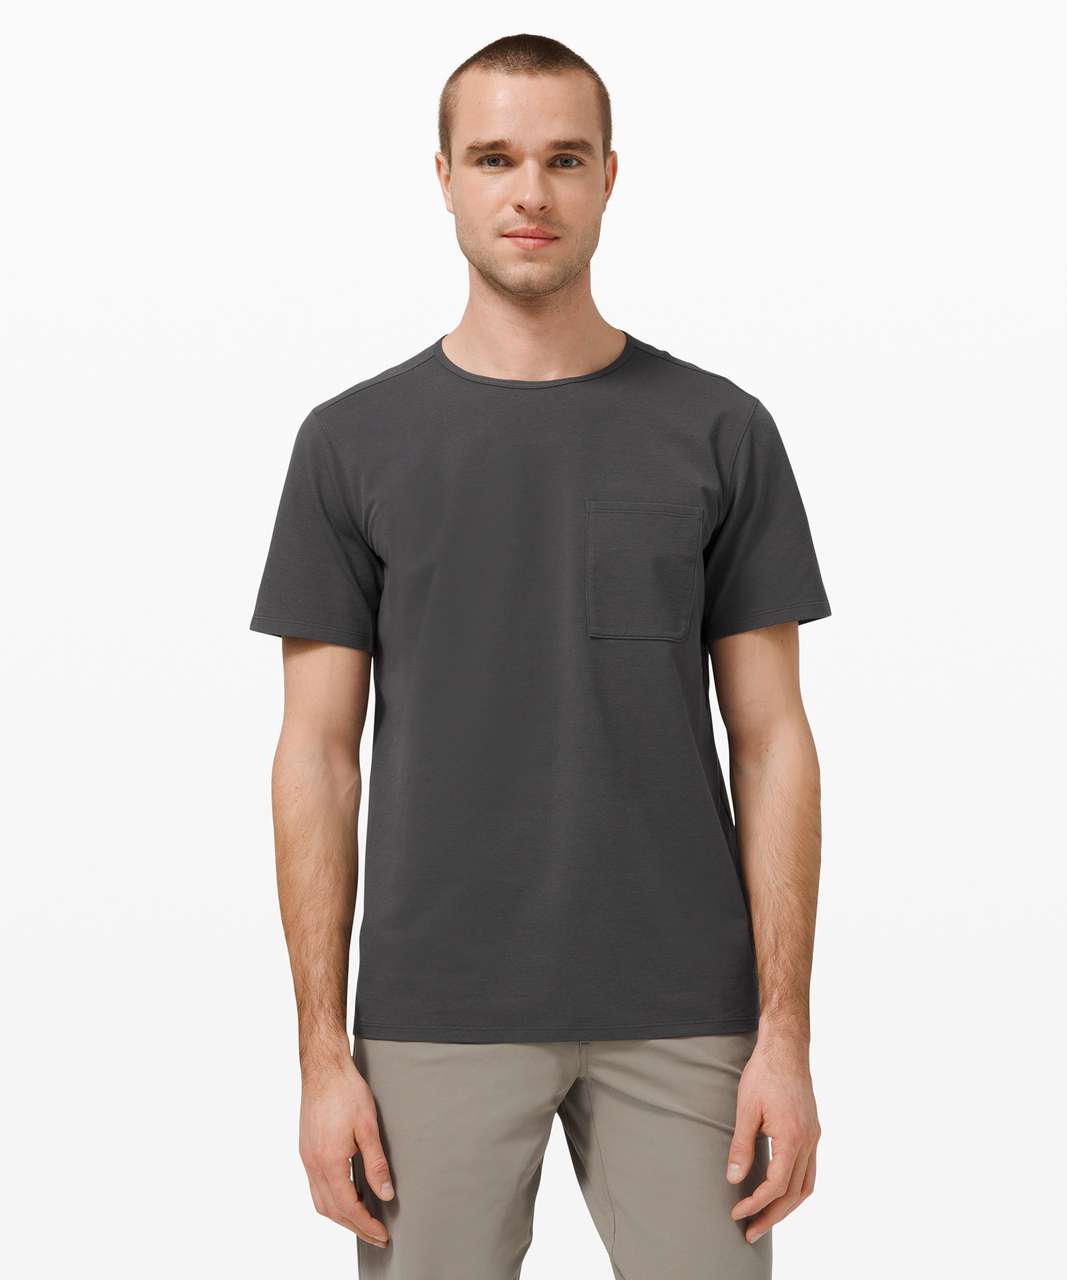 Lululemon Chest Pocket Relaxed Fit Tee - Graphite Grey